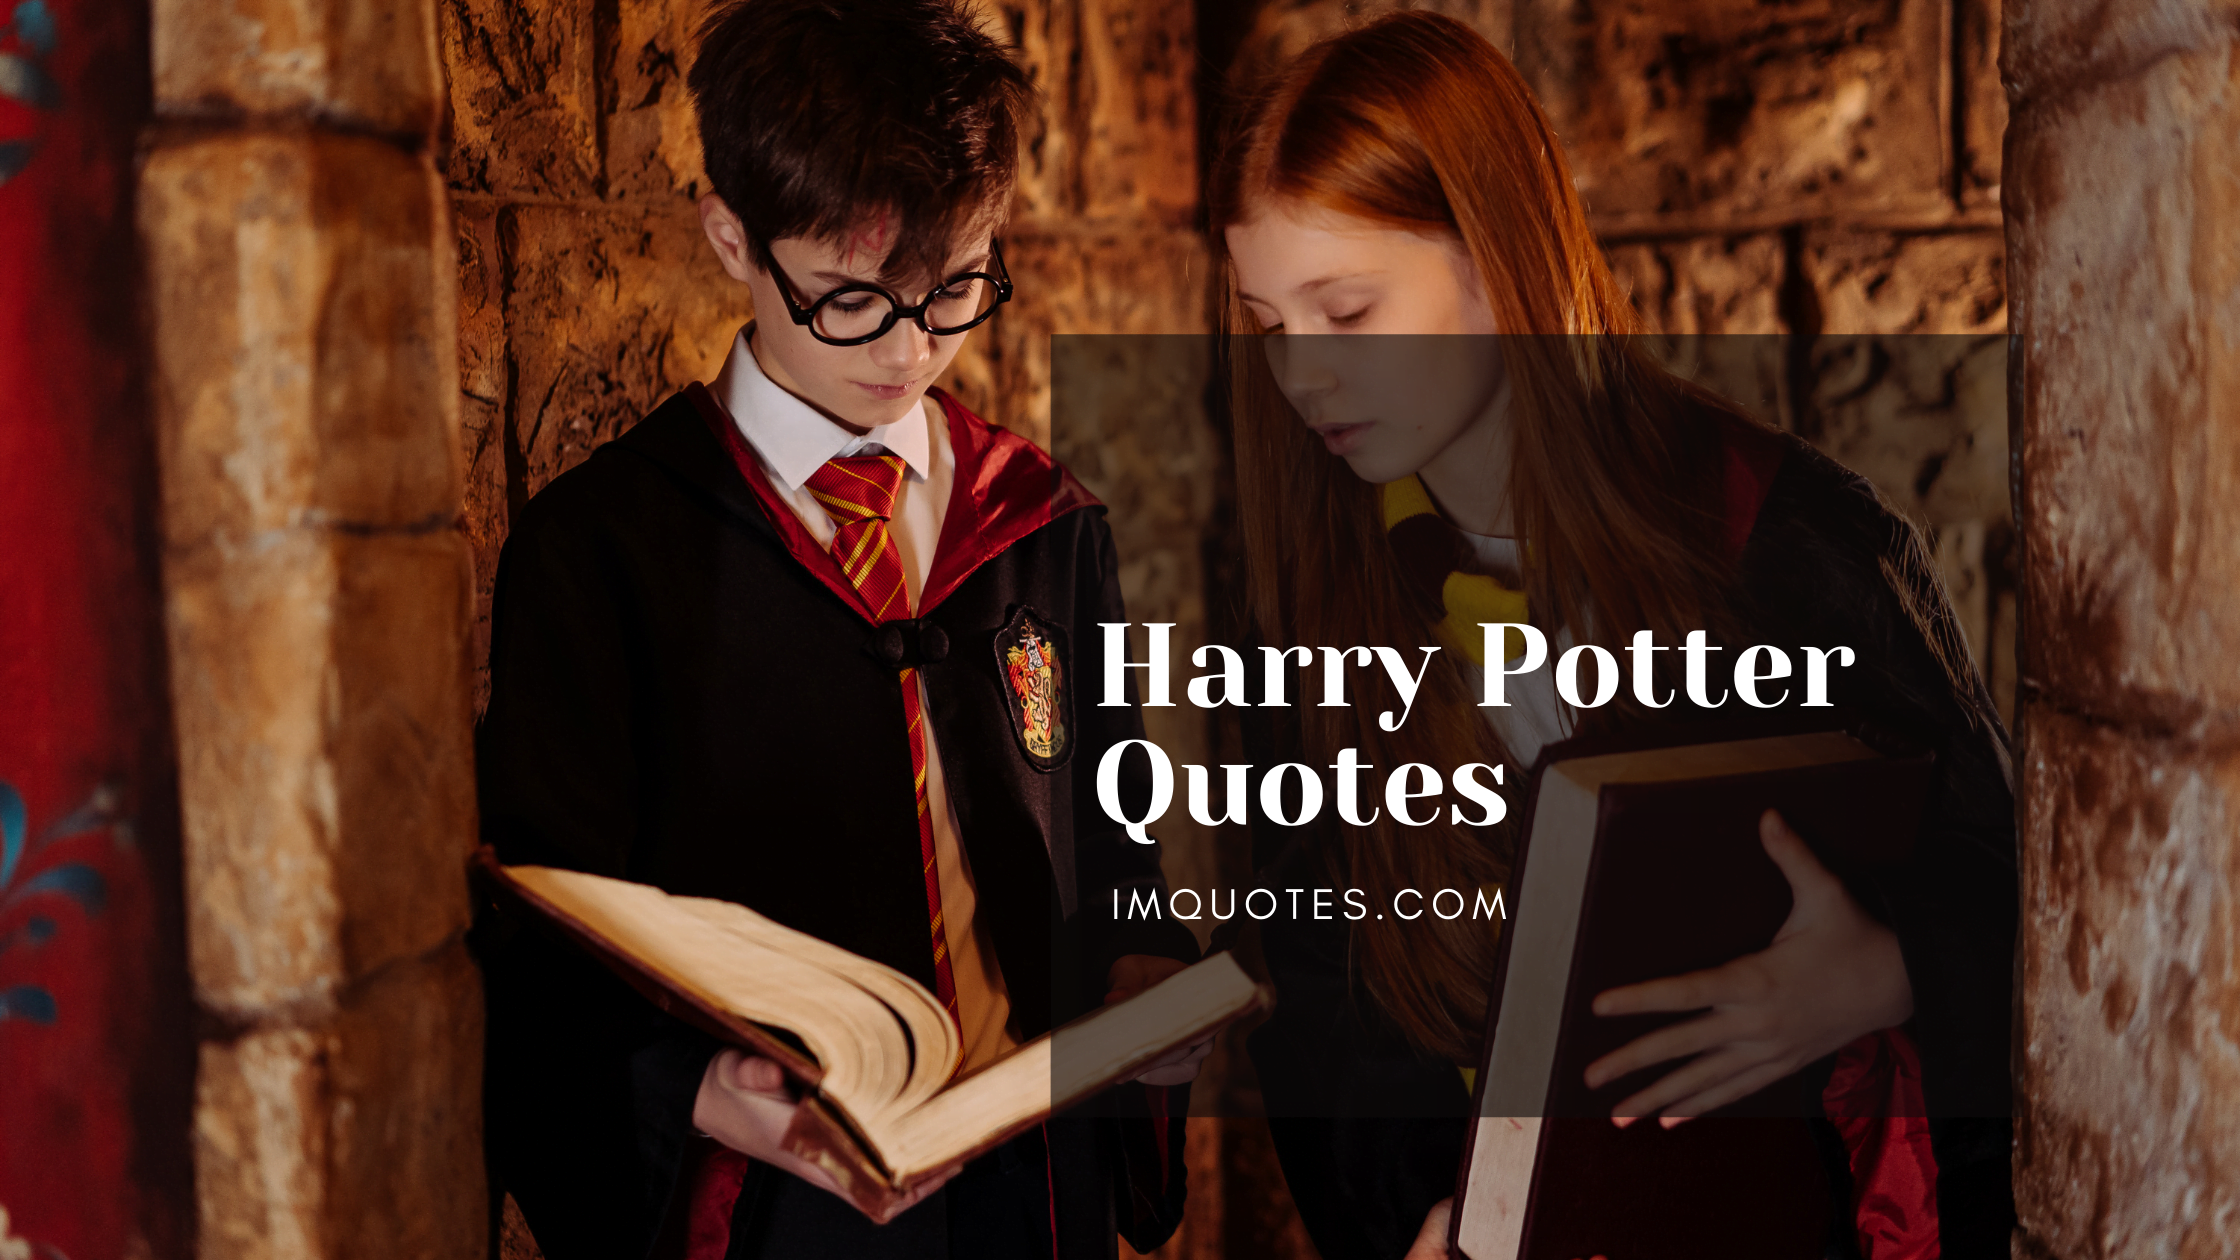 Some Magical Harry Potter Quotes